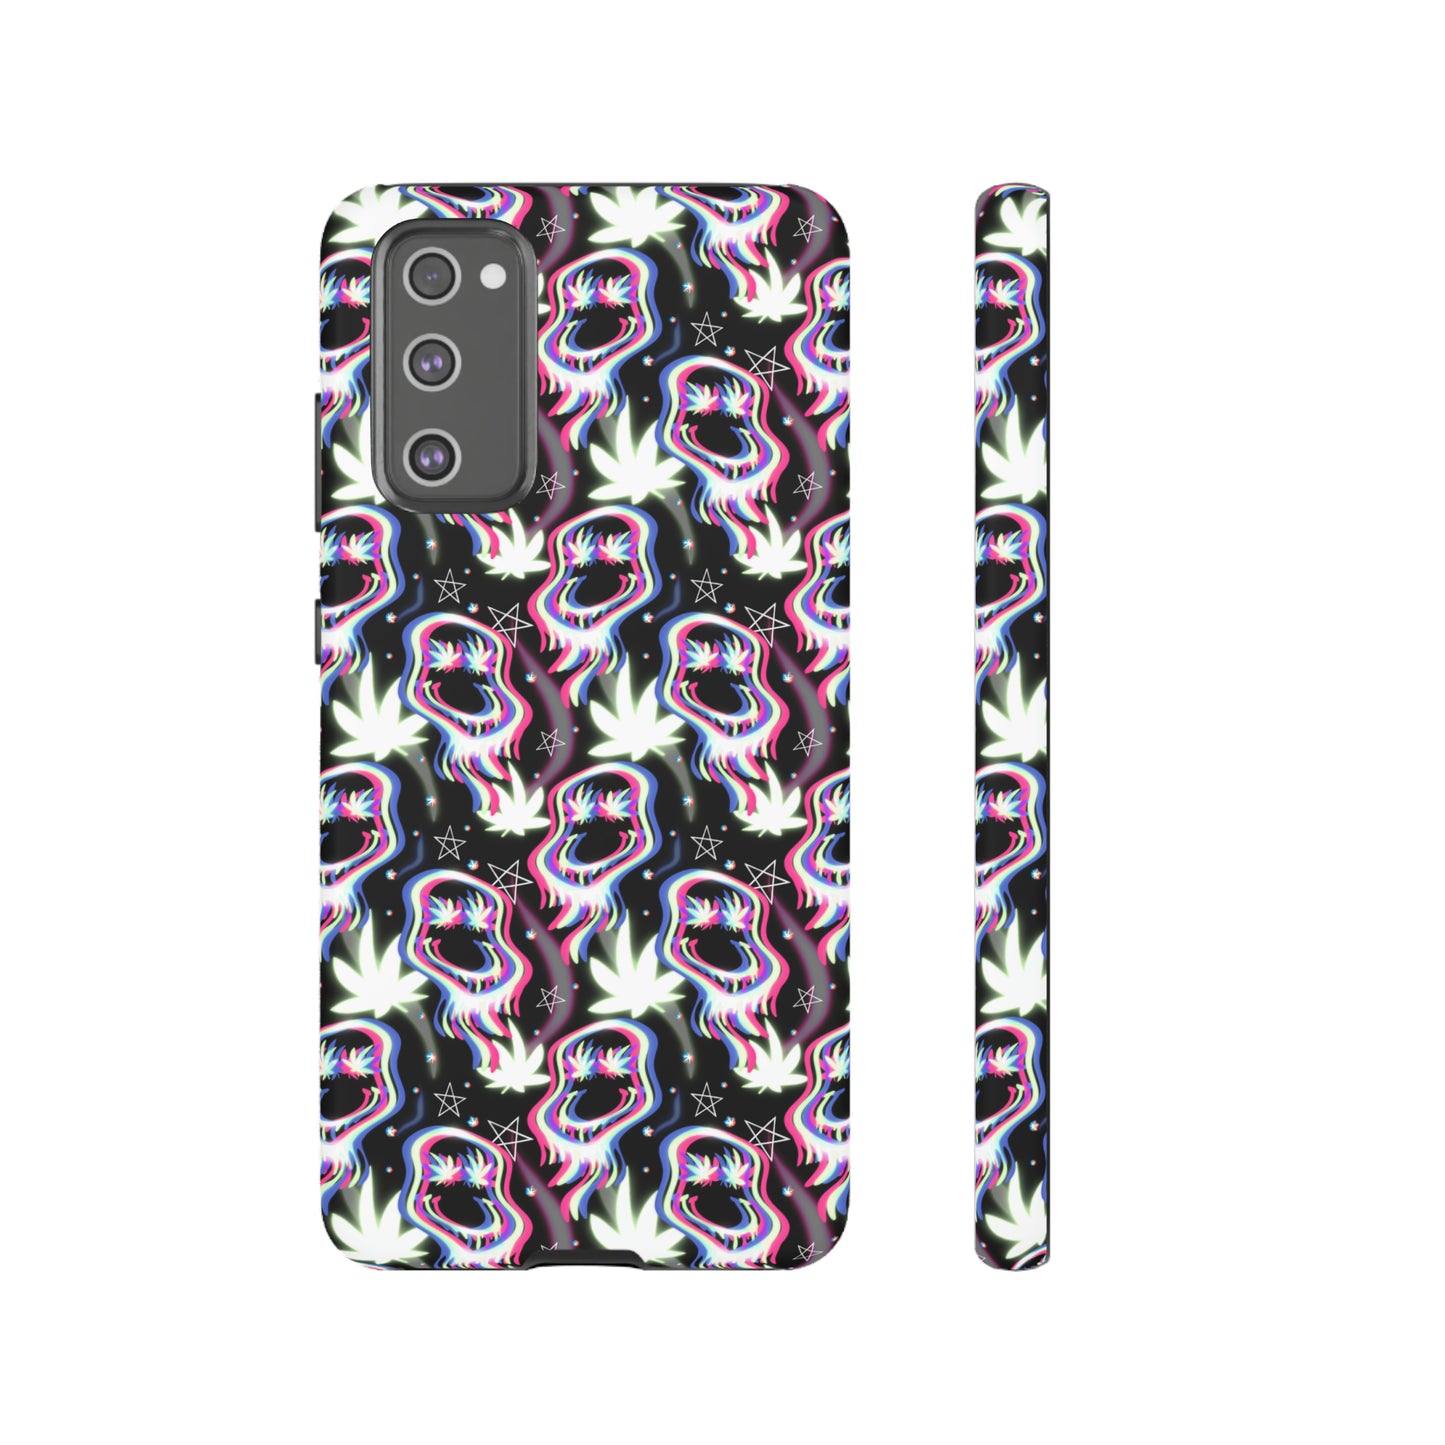 420 smiley Tough Phone Case for Iphones, Samsungs, and Google phones